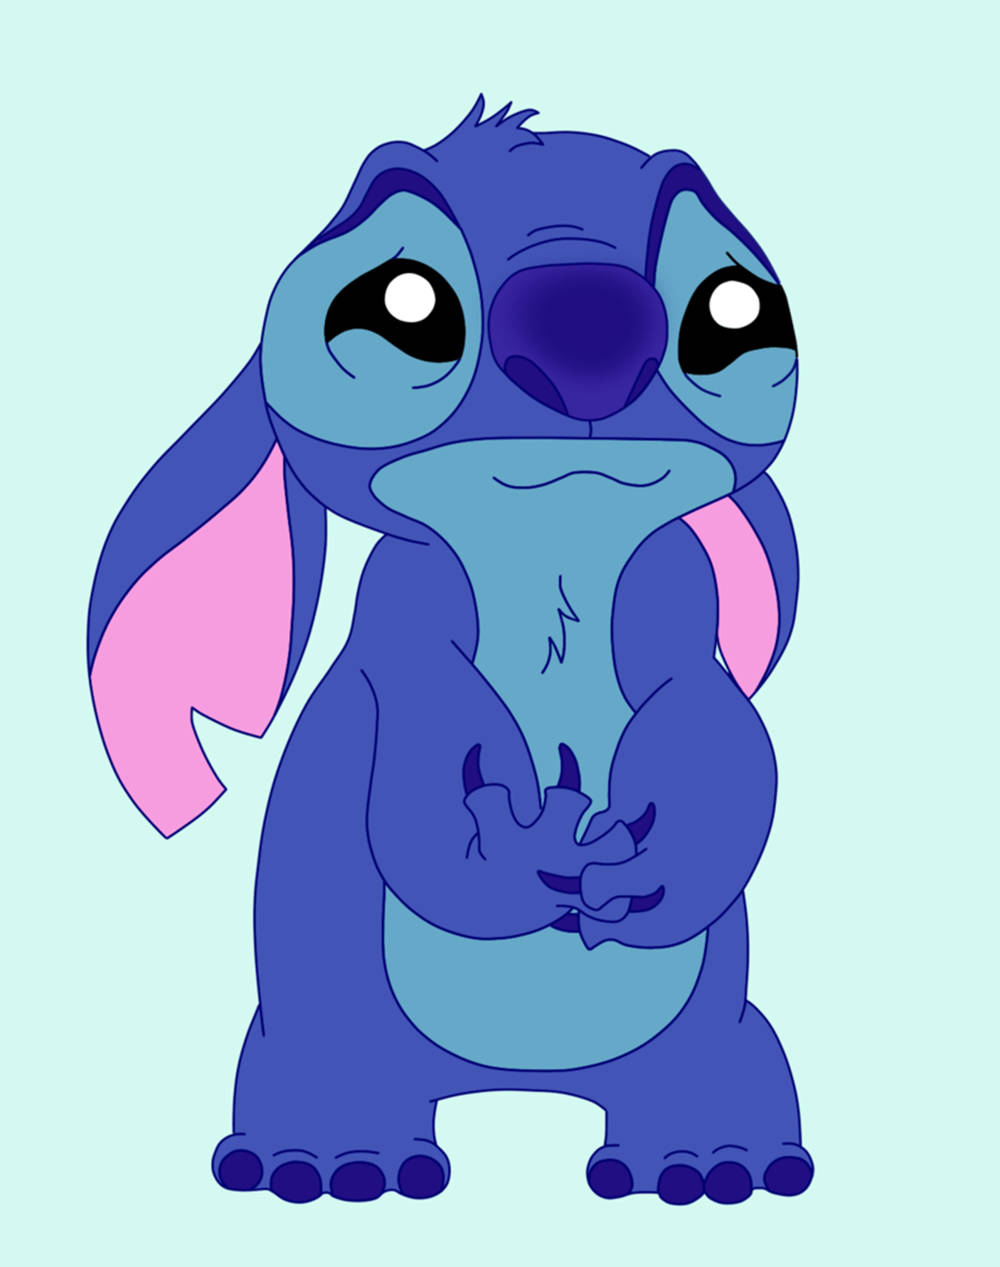 Cute Crying Stitch IPhone Wallpaper